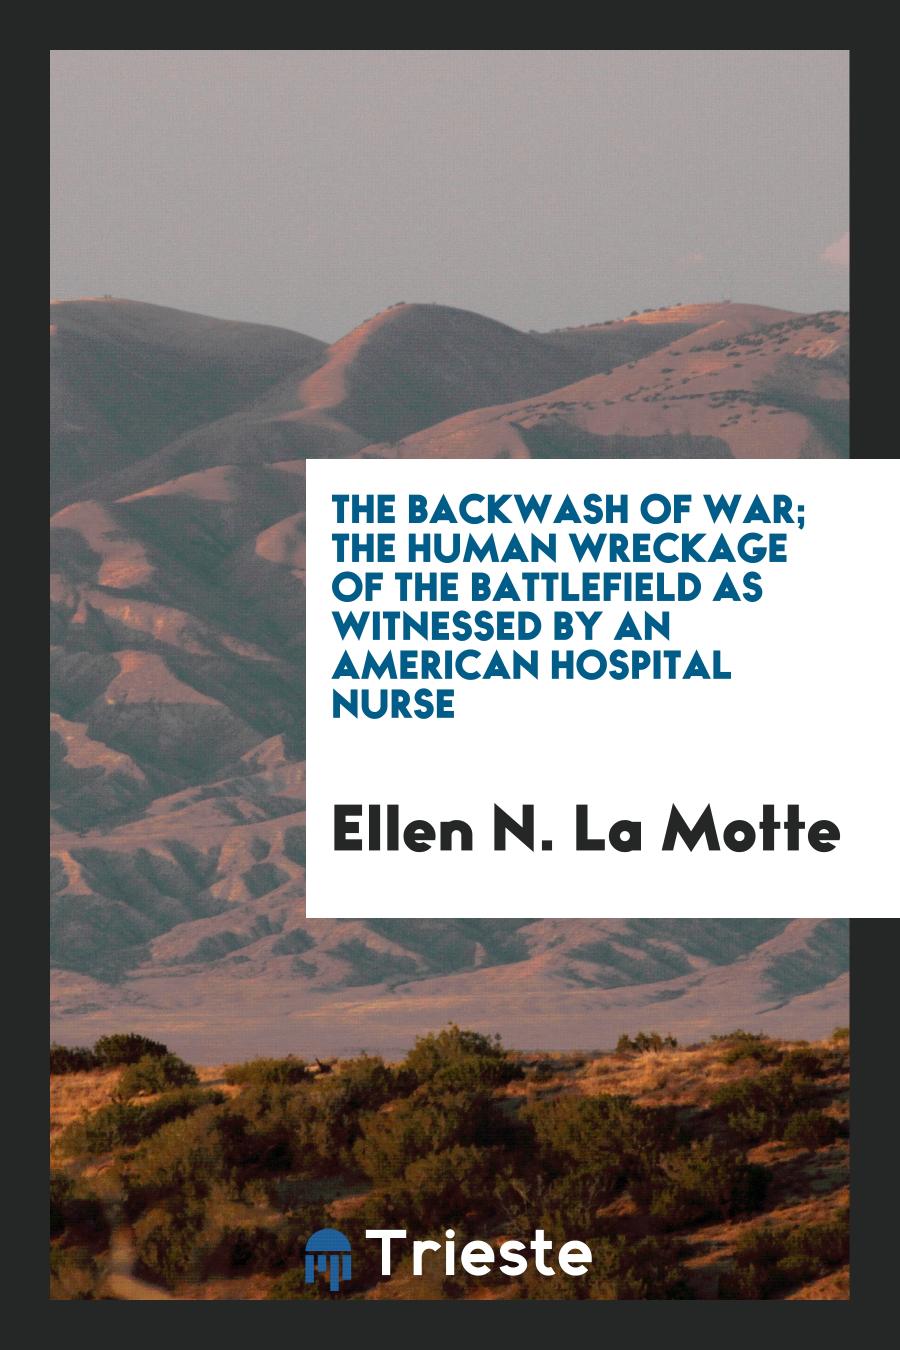 The backwash of war; the human wreckage of the battlefield as Witnessed by an American Hospital Nurse